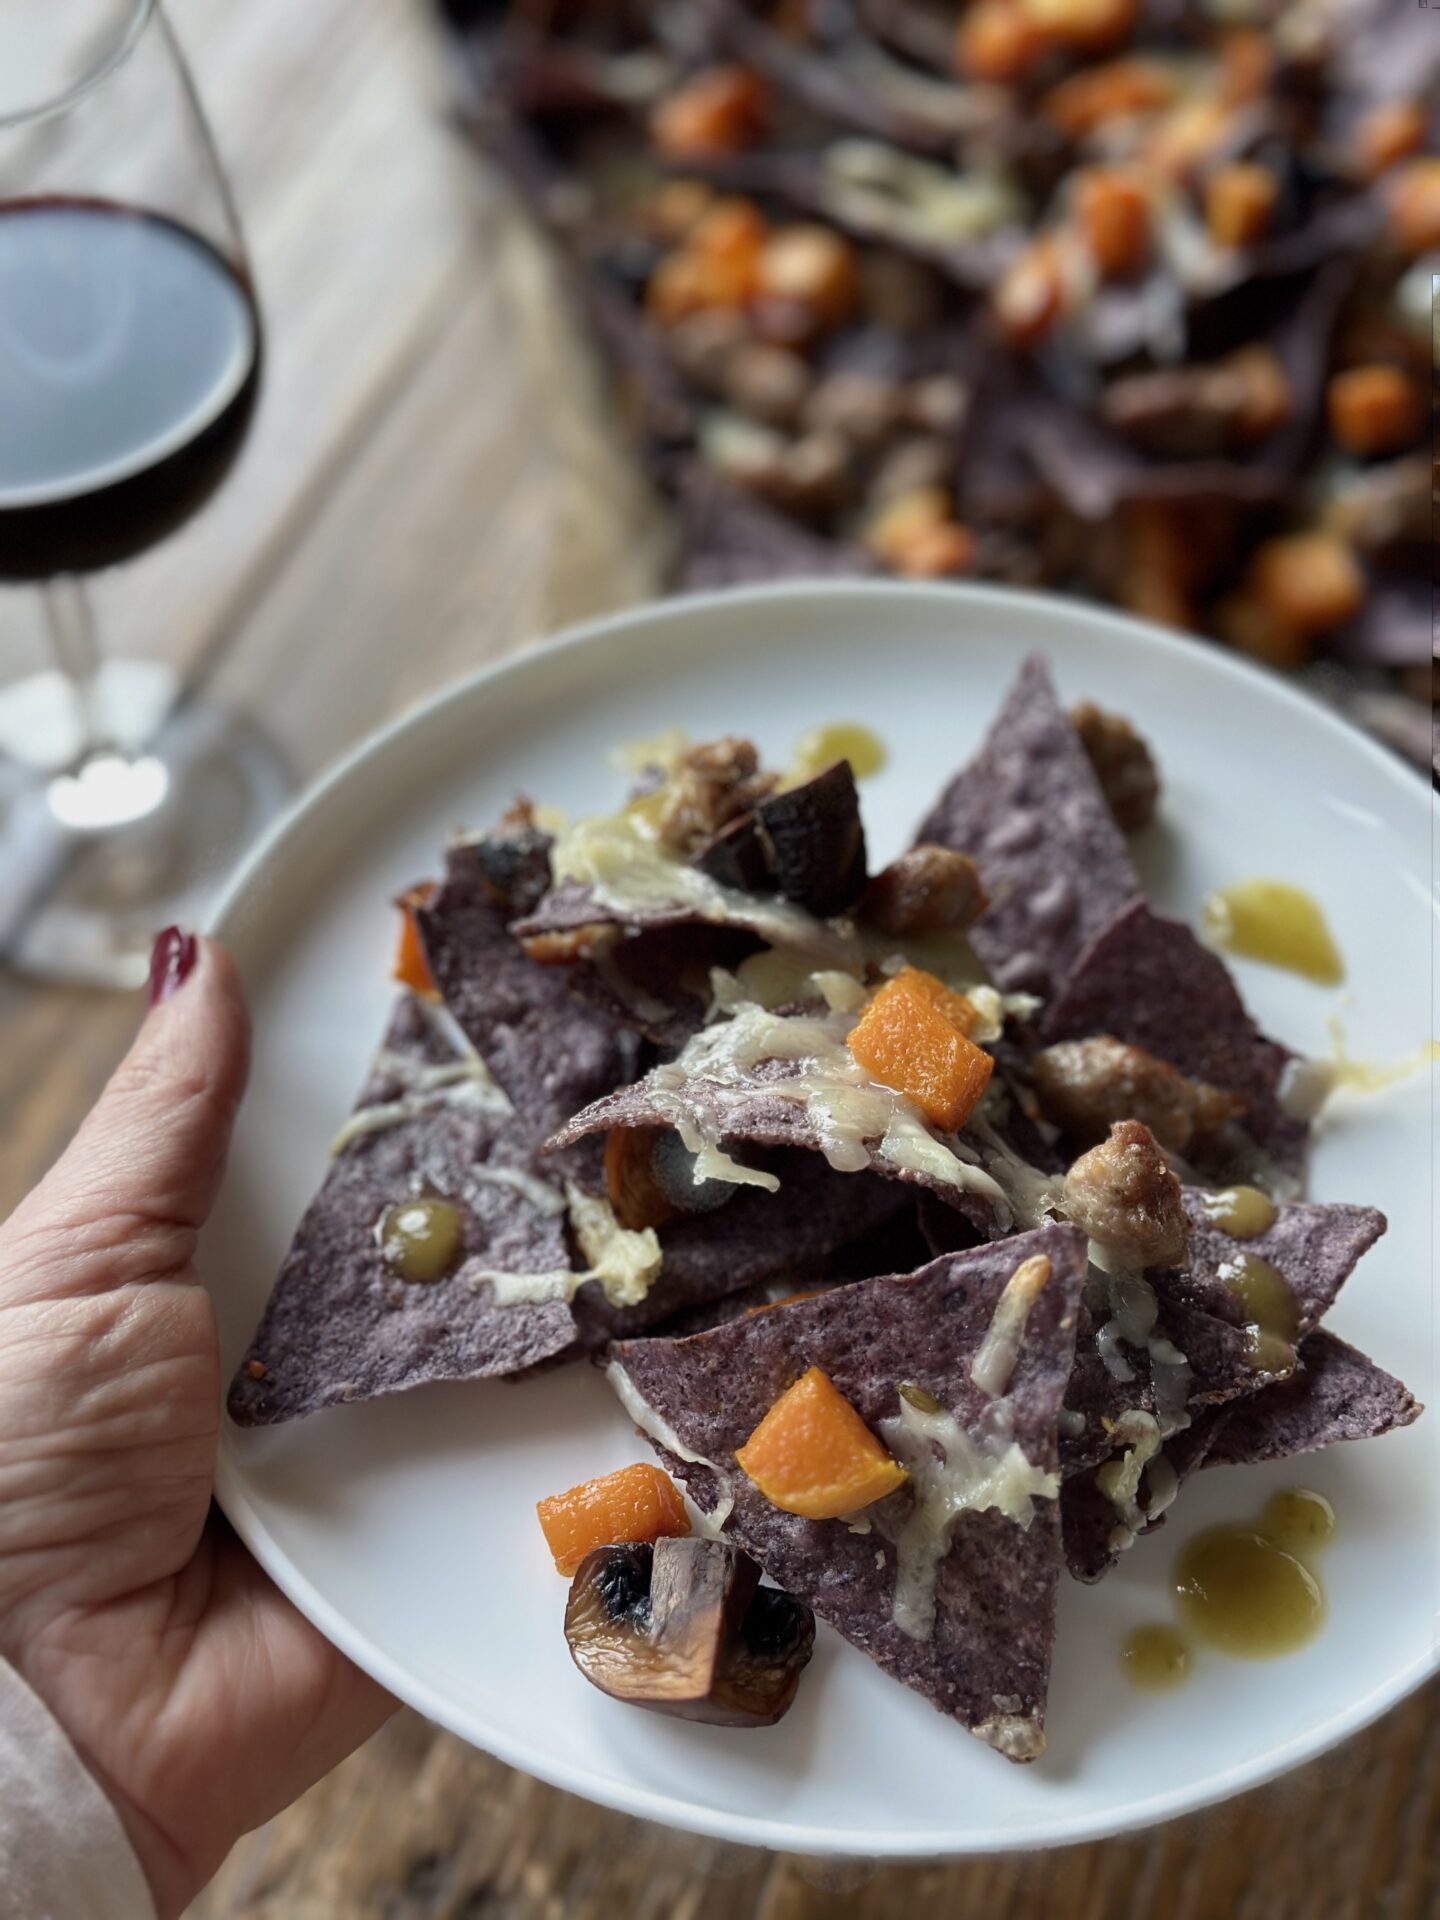 A hand holds a plate of blue corn harvest nachos in front of a glass of red wine